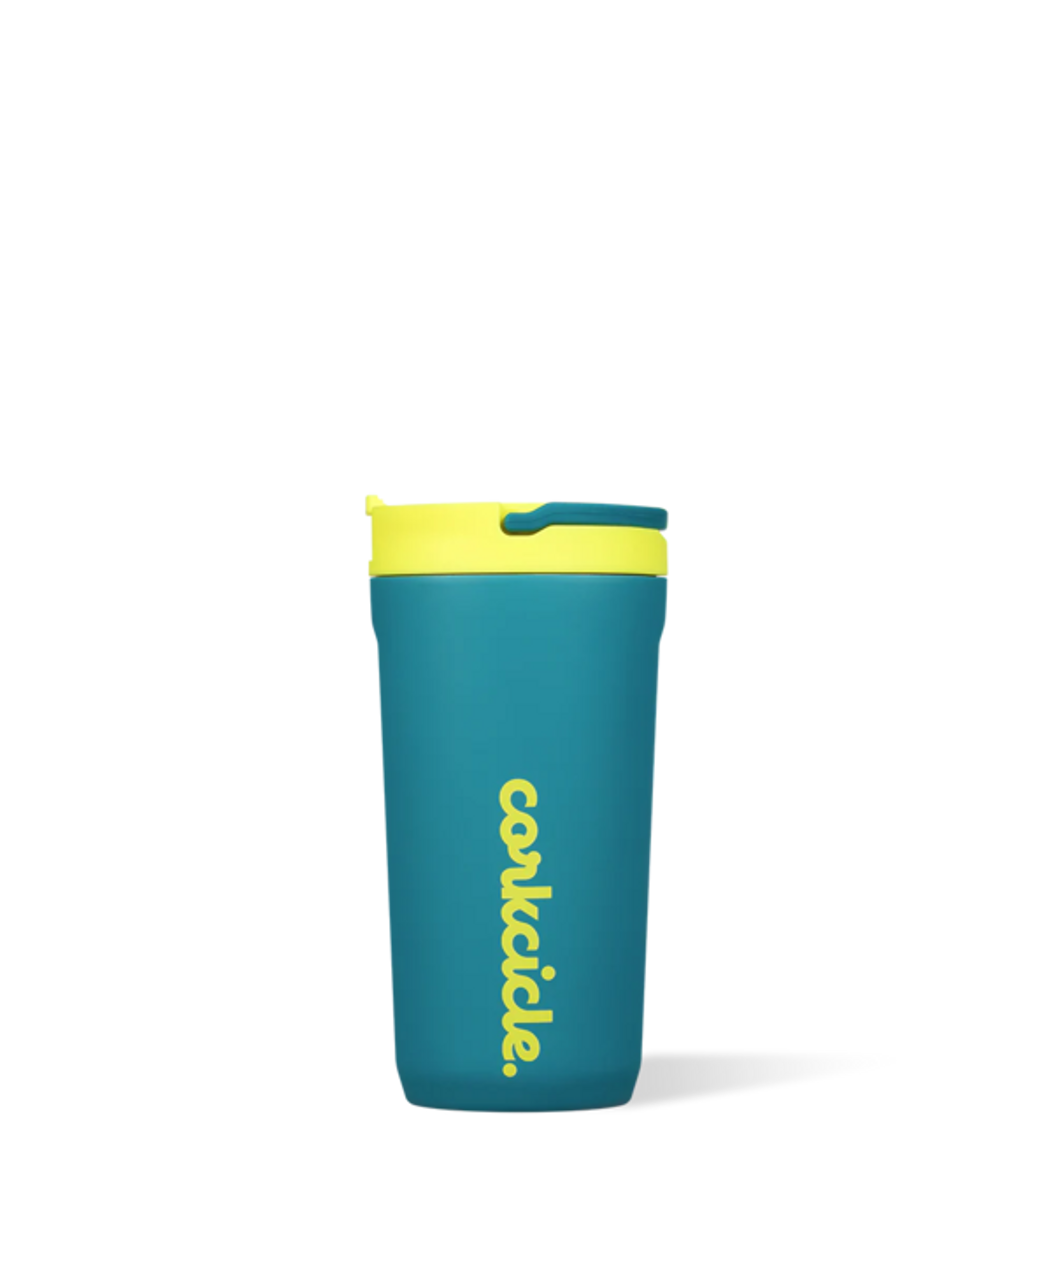 https://cdn11.bigcommerce.com/s-e0xlh4avpe/images/stencil/1280x1280/products/122986/167360/corkcicle-electric-tide-kids-cup-12oz__95221.1669140162.png?c=1